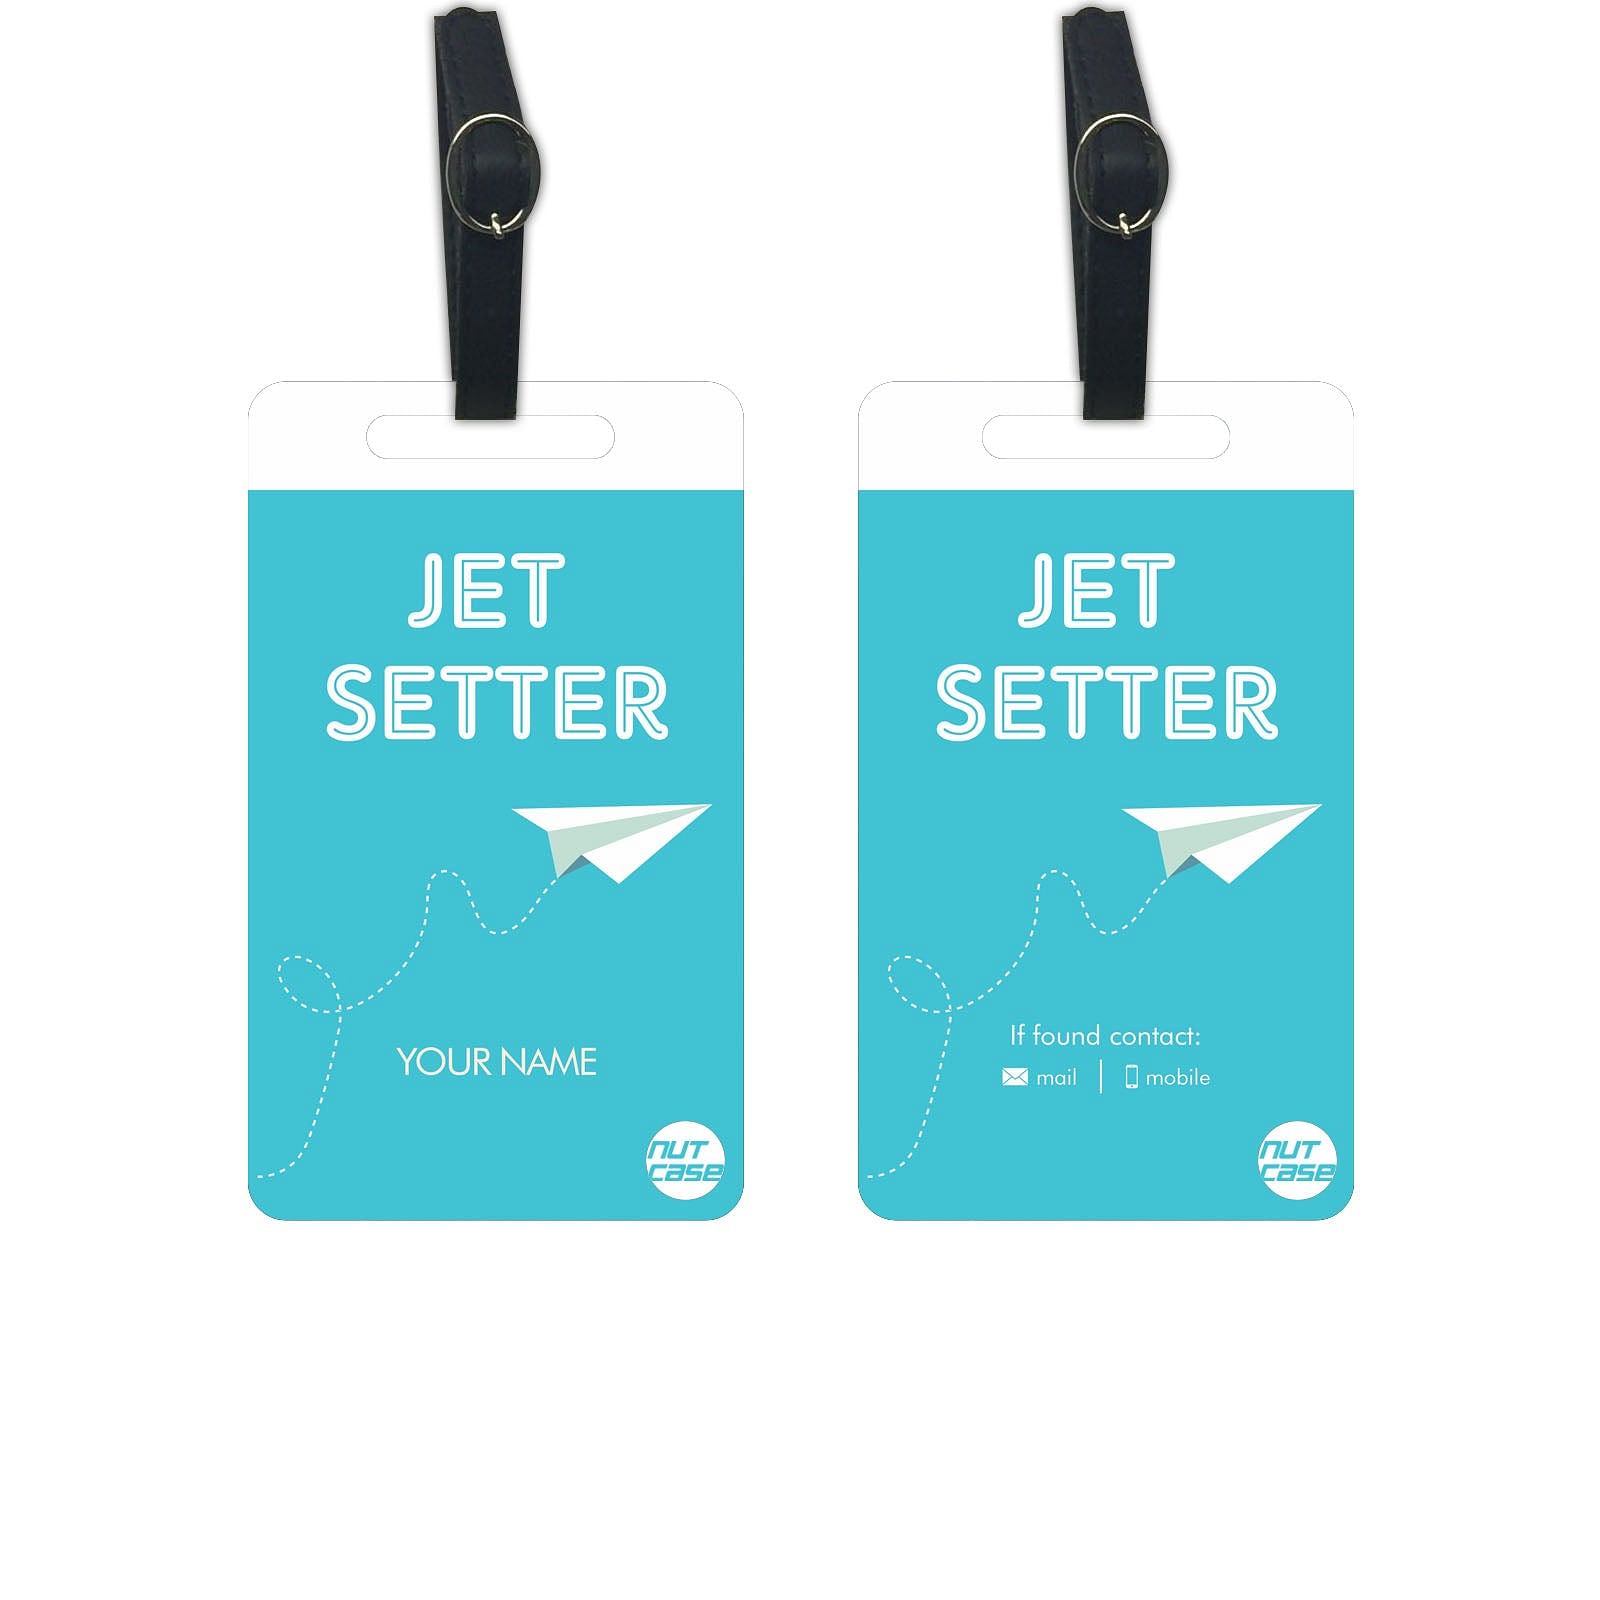 Custom-made Unique Luggage Tag - Add your Name - Set of 2 Nutcase